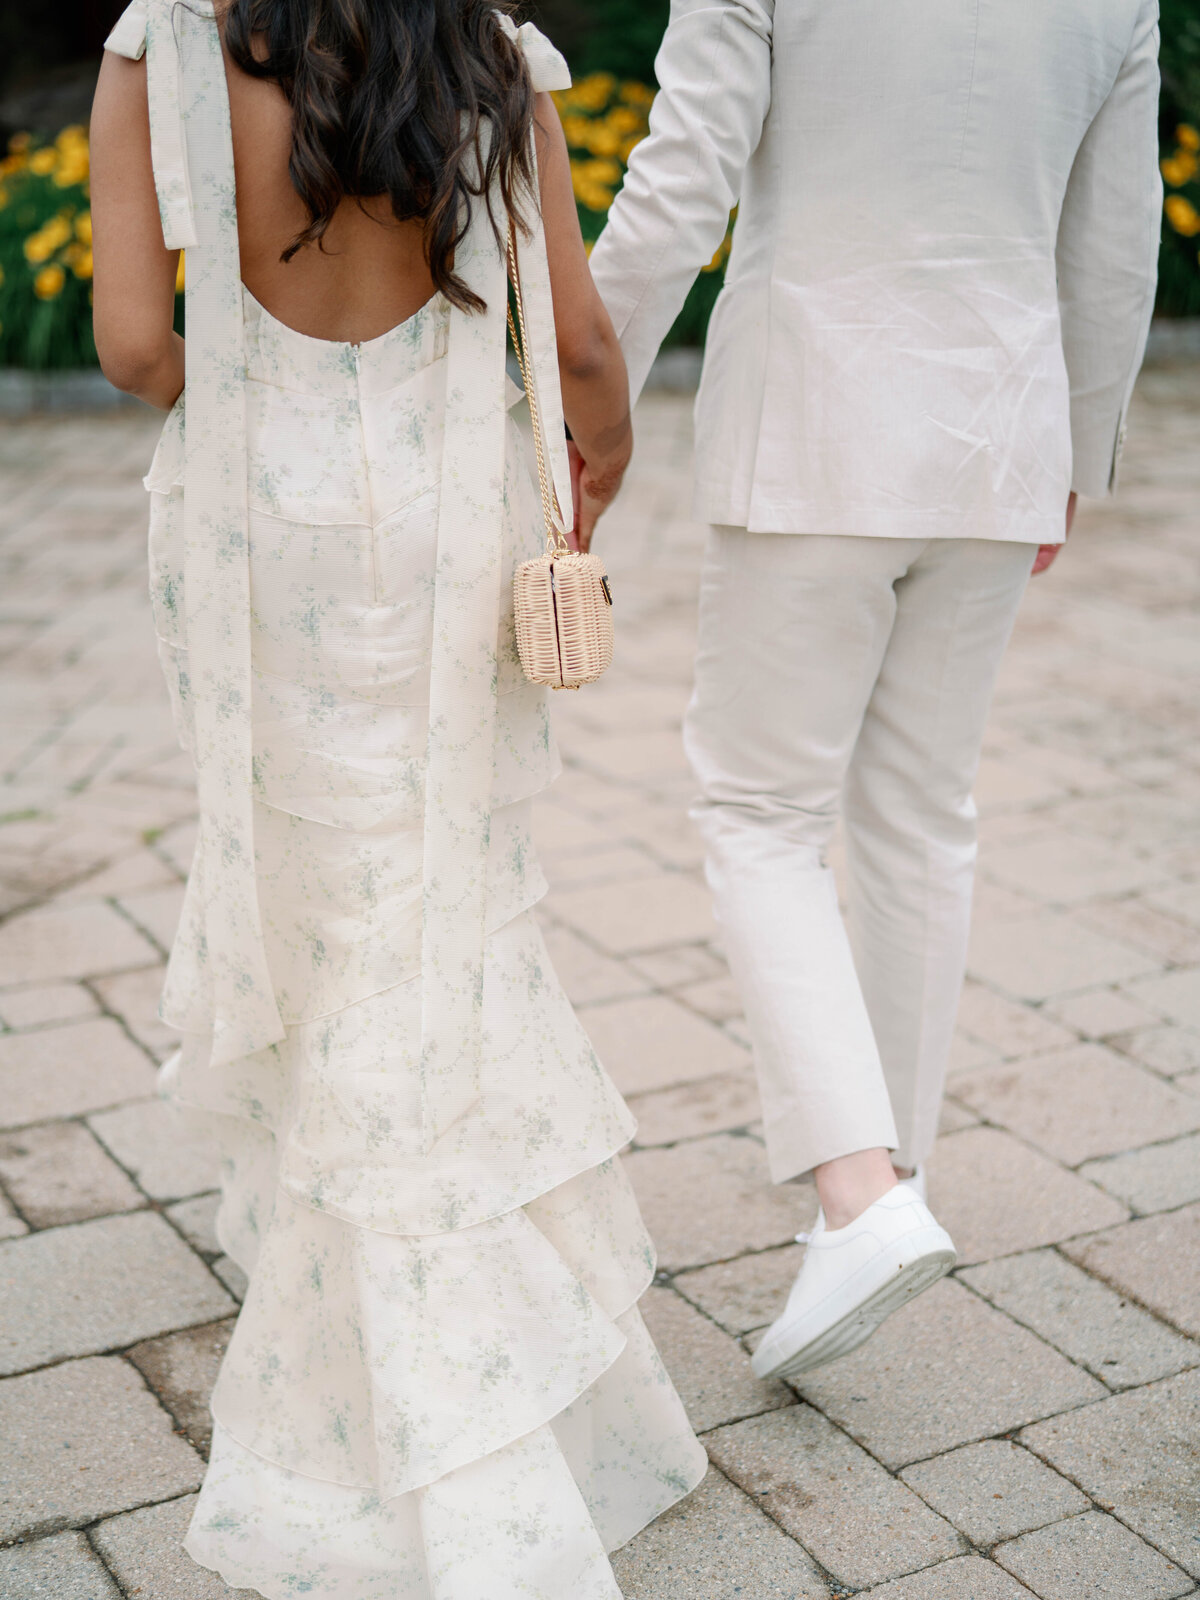 Liz Andolina Photography Destination Wedding Photographer in Italy, New York, Across the East Coast Editorial, heritage-quality images for stylish couples-951